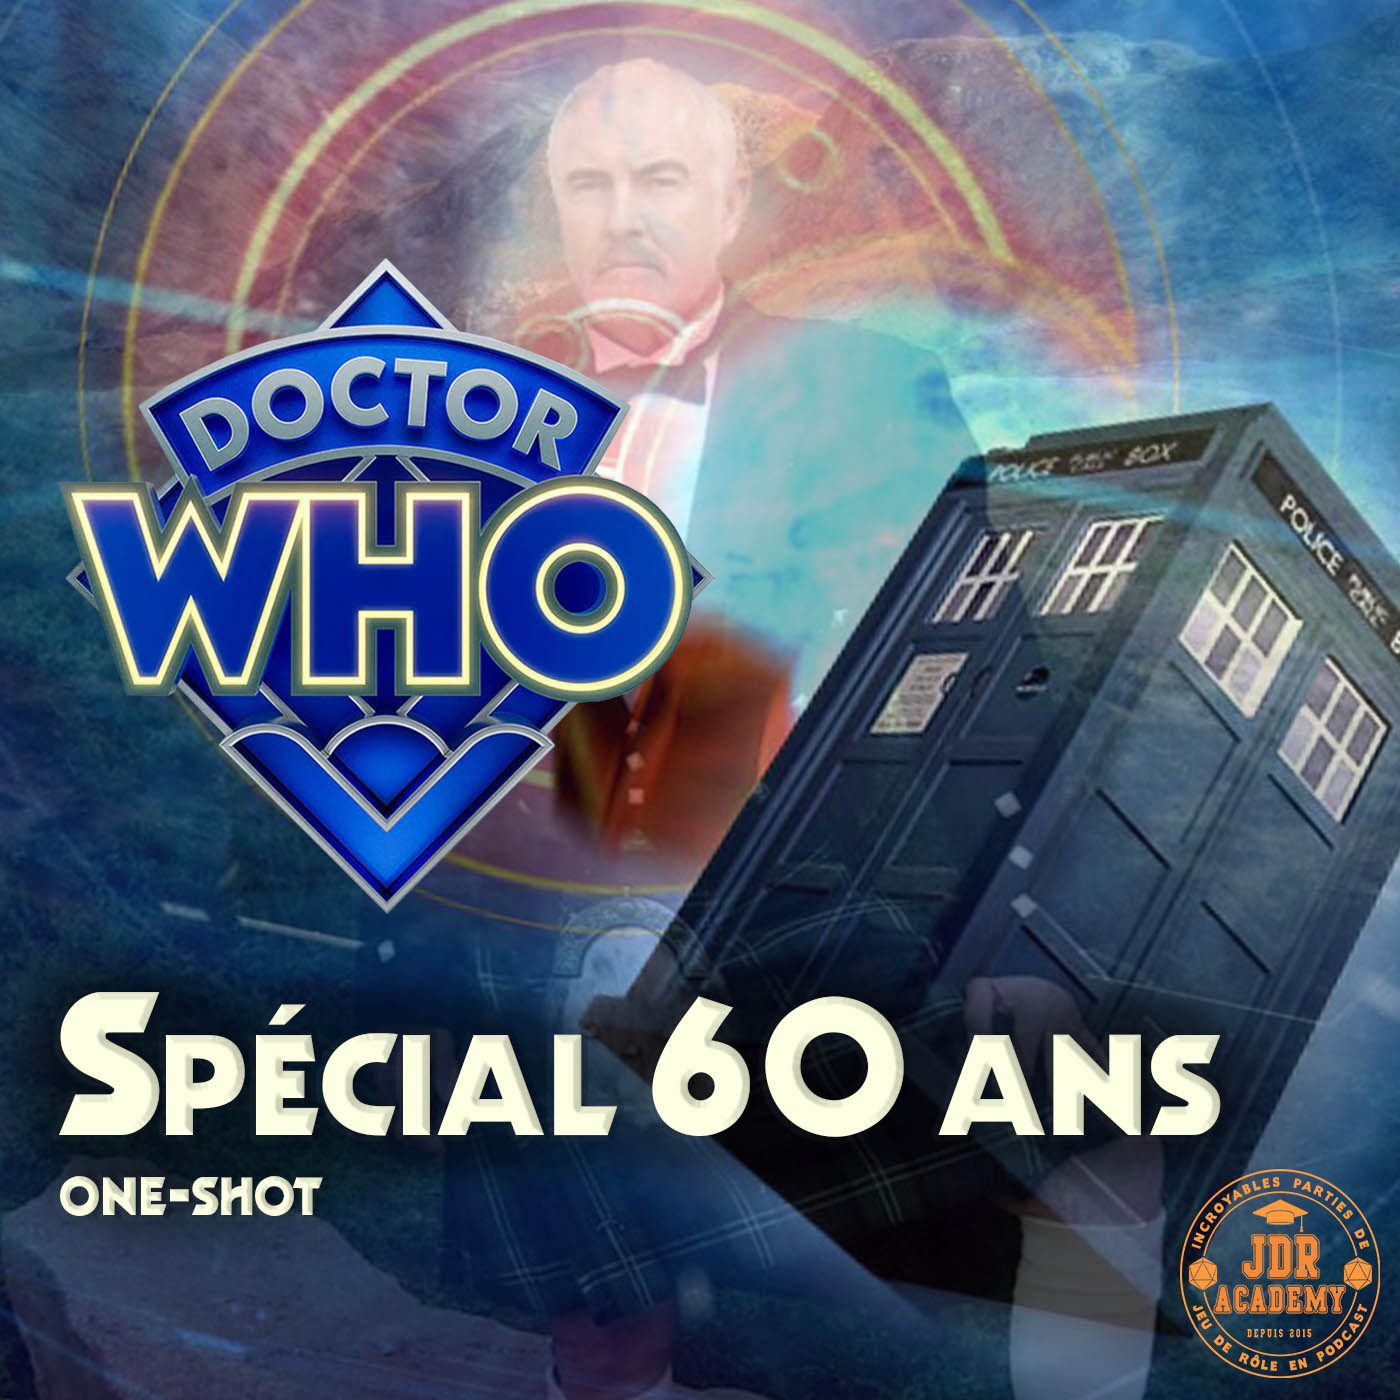 DOCTOR WHO – Spécial 60 ans (one-shot)